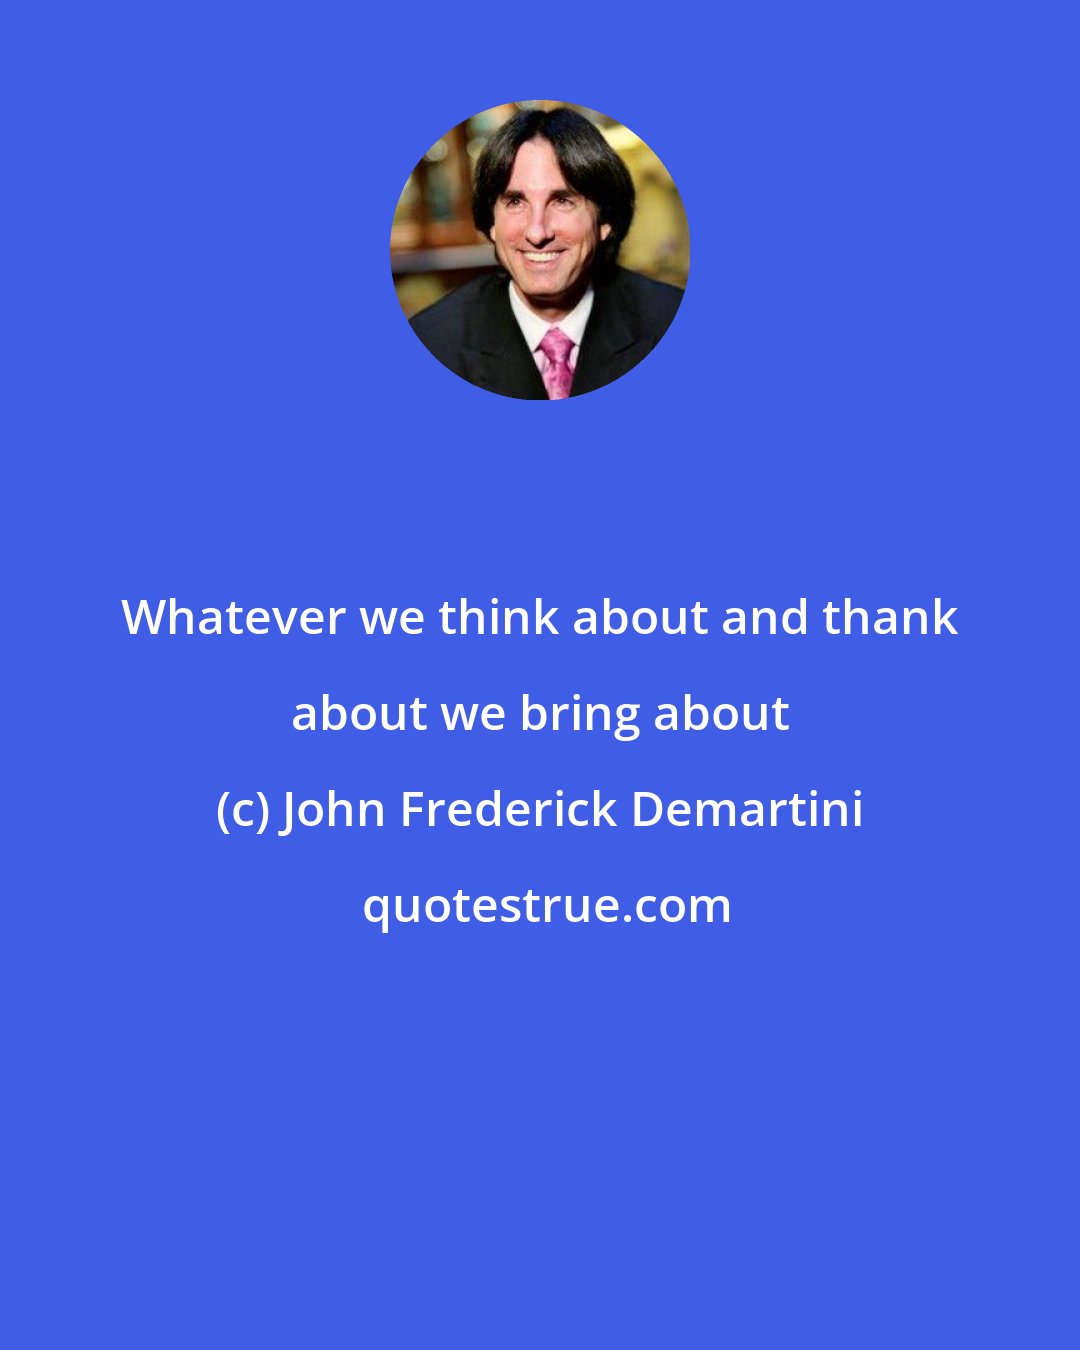 John Frederick Demartini: Whatever we think about and thank about we bring about